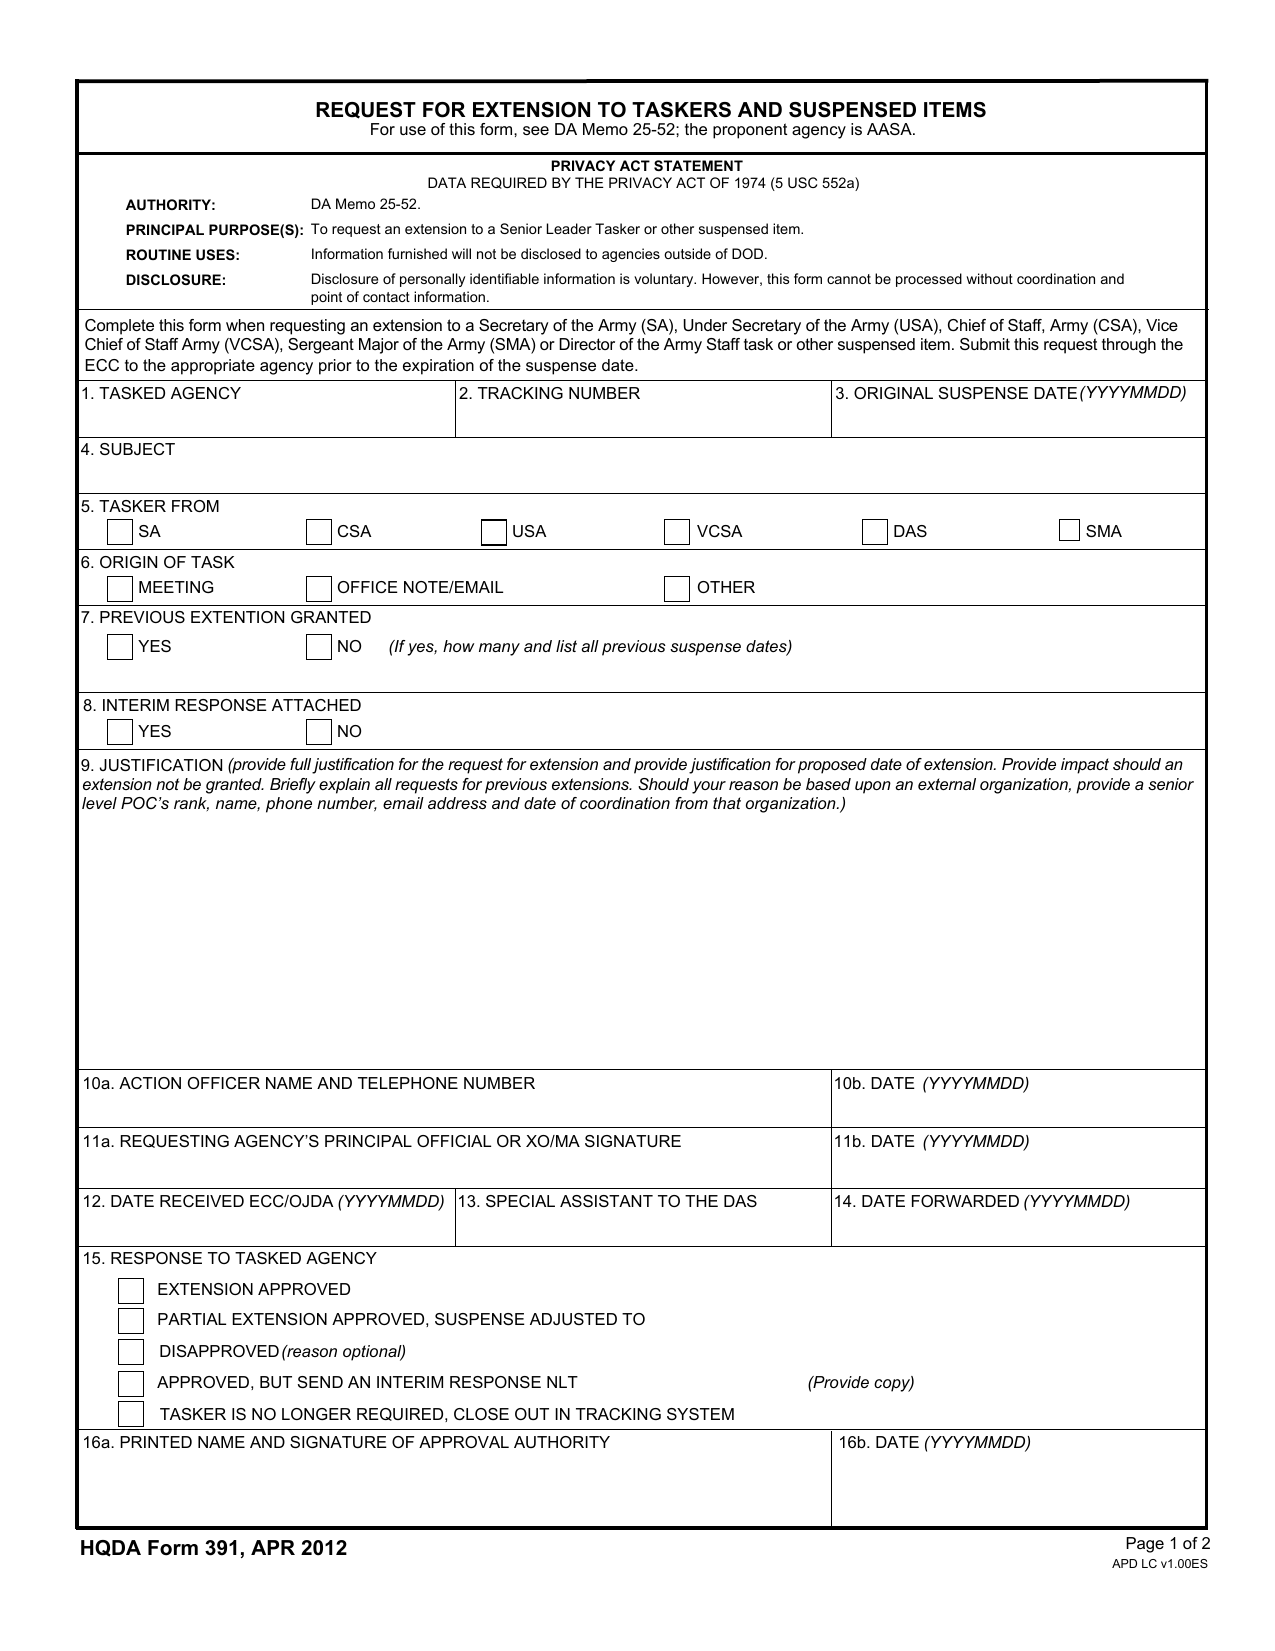 Download DA Form HQDA391 | Request For Extension To Taskers And Suspensed Items PDF | FreeDownloads.net